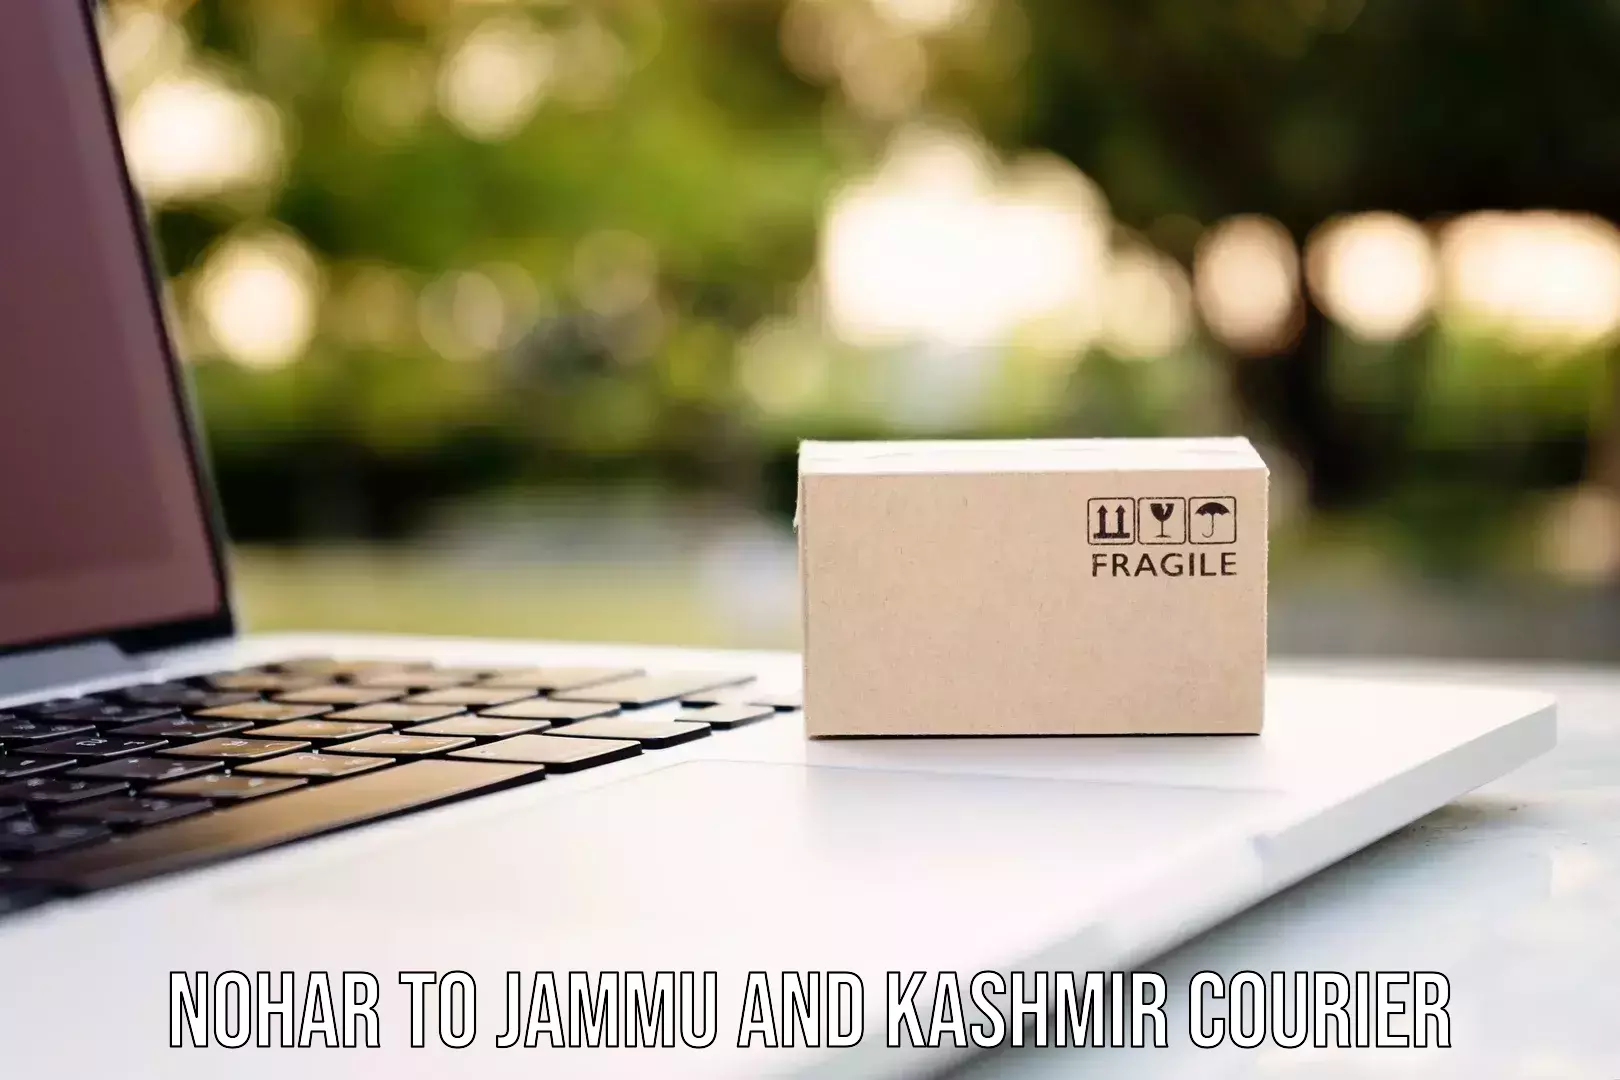 Global courier networks Nohar to Jammu and Kashmir